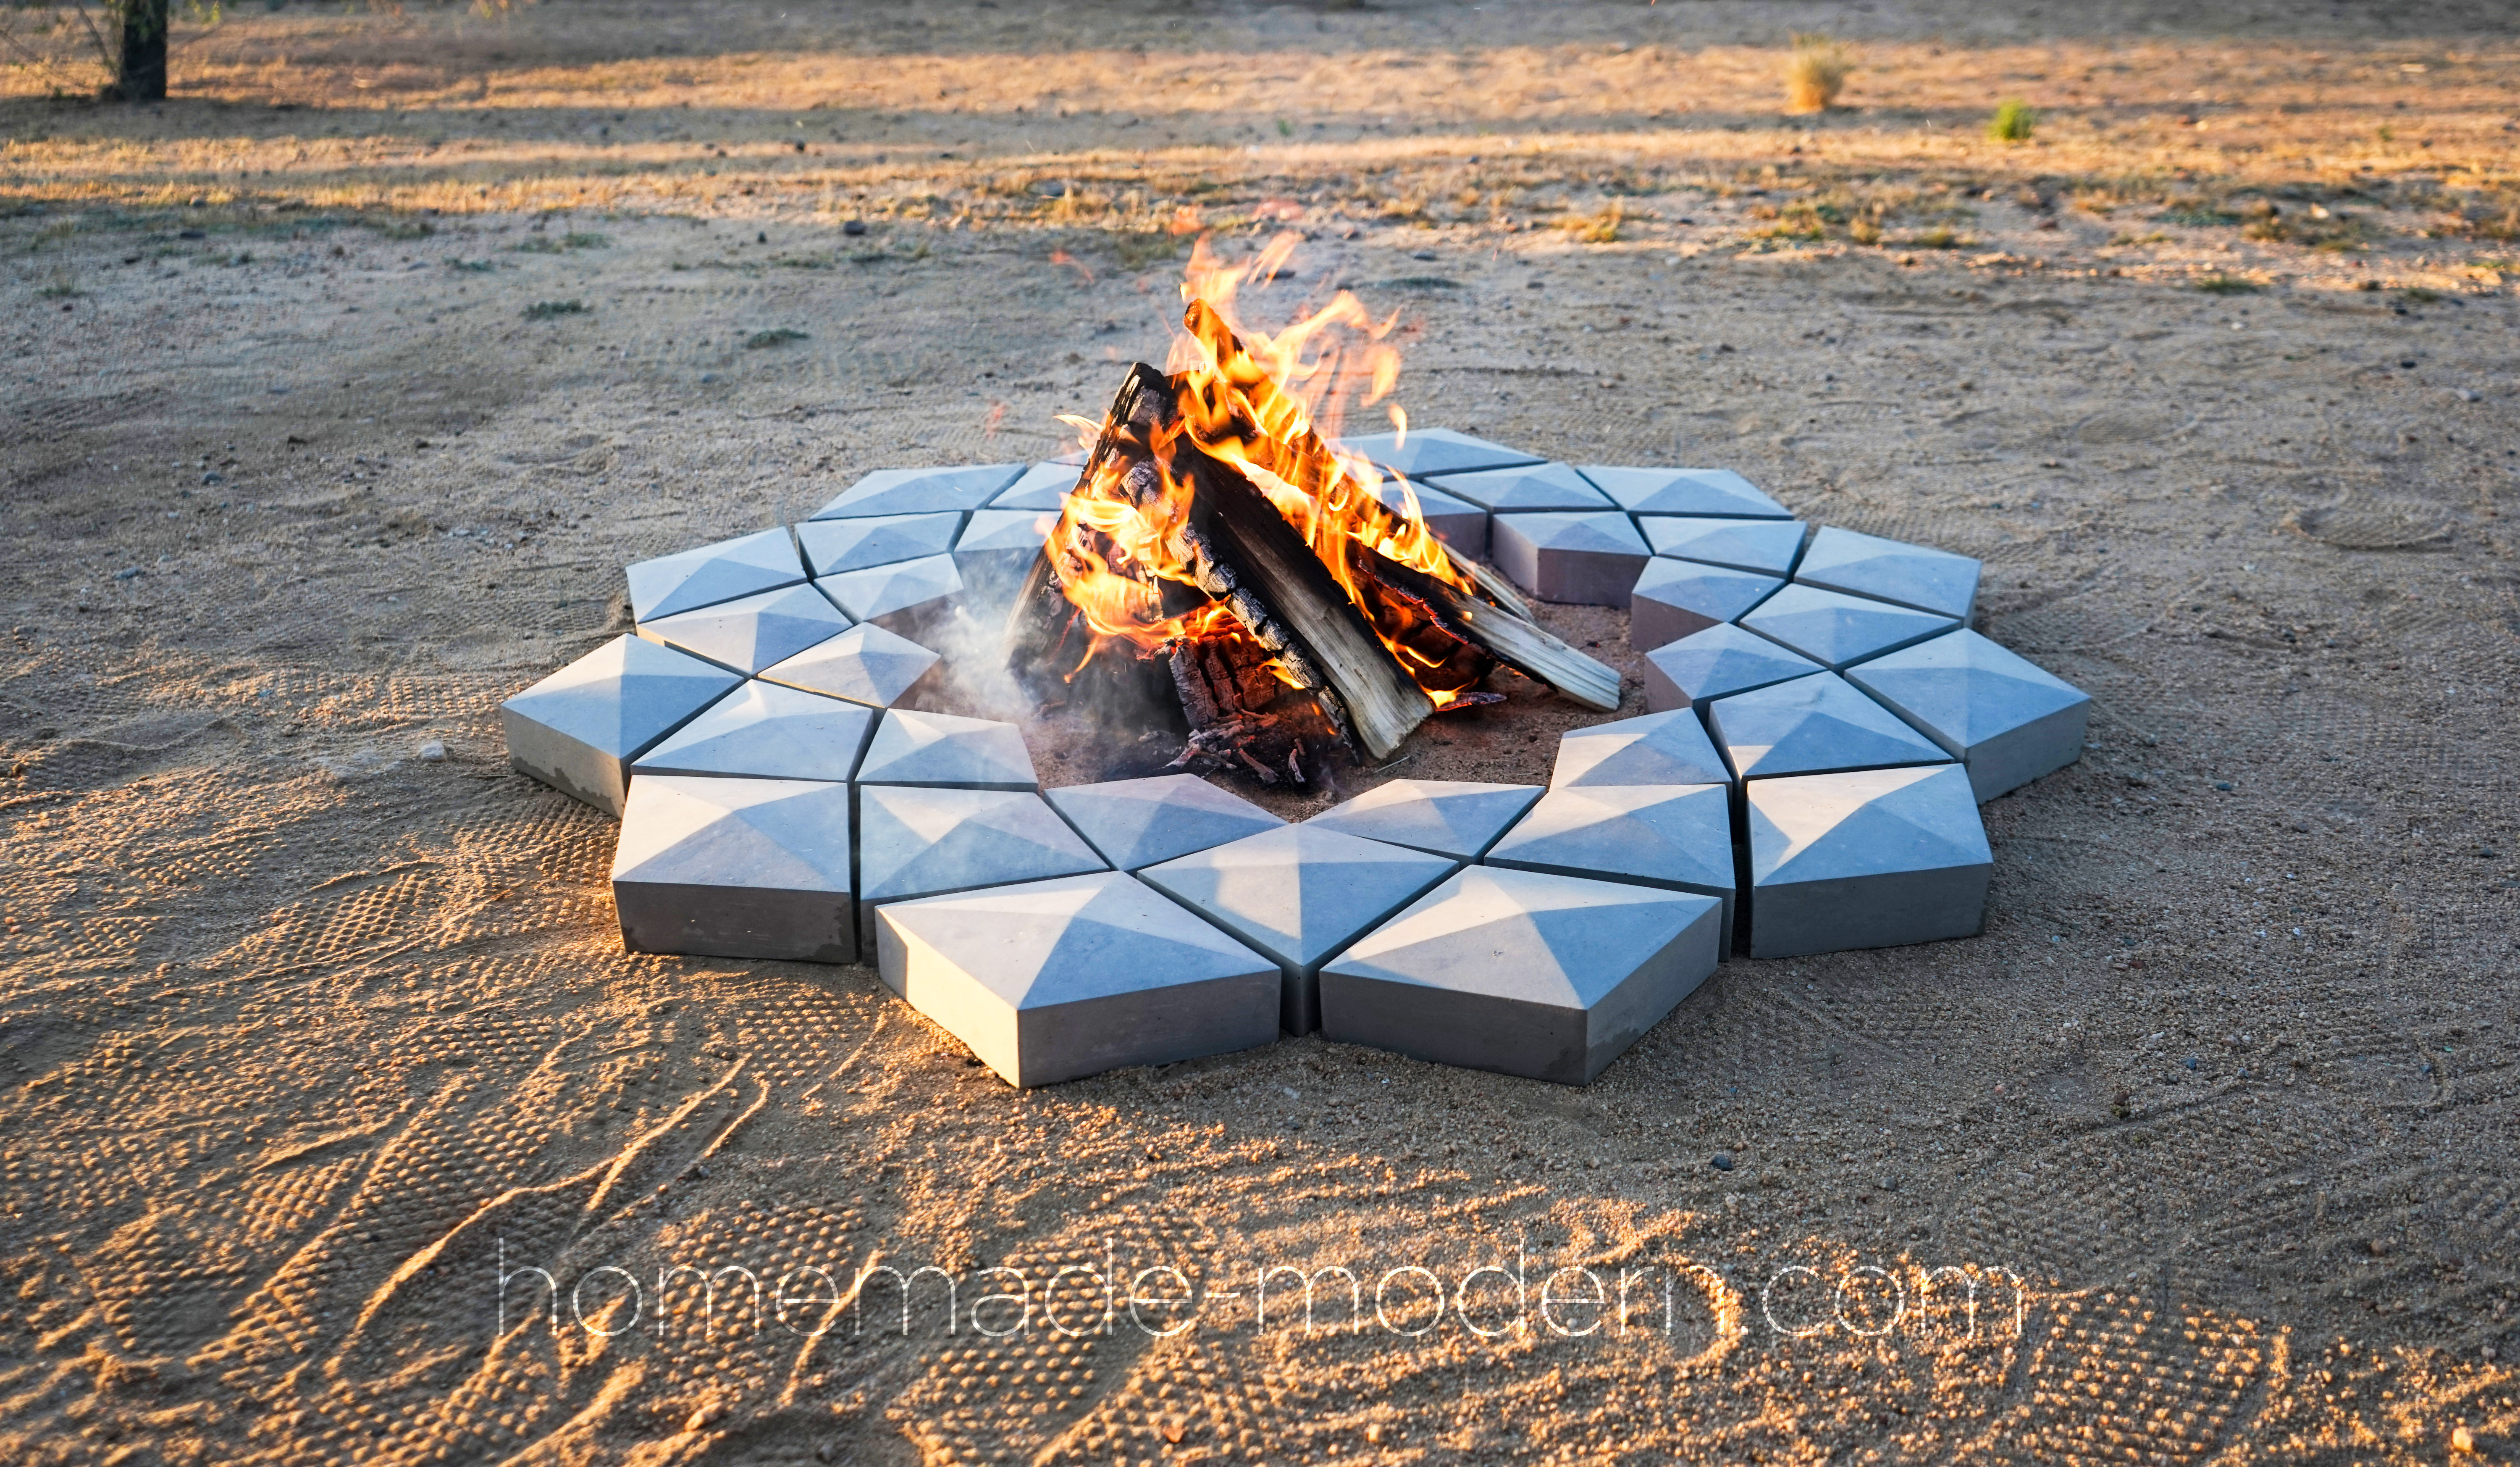 This 3D printed concrete fire pit was designed by Ben Uyeda of HomeMade-Modern.com You can download the 3D files for free and see a video showing the entire fabrication process. For more information go to HomeMade-Modern.com